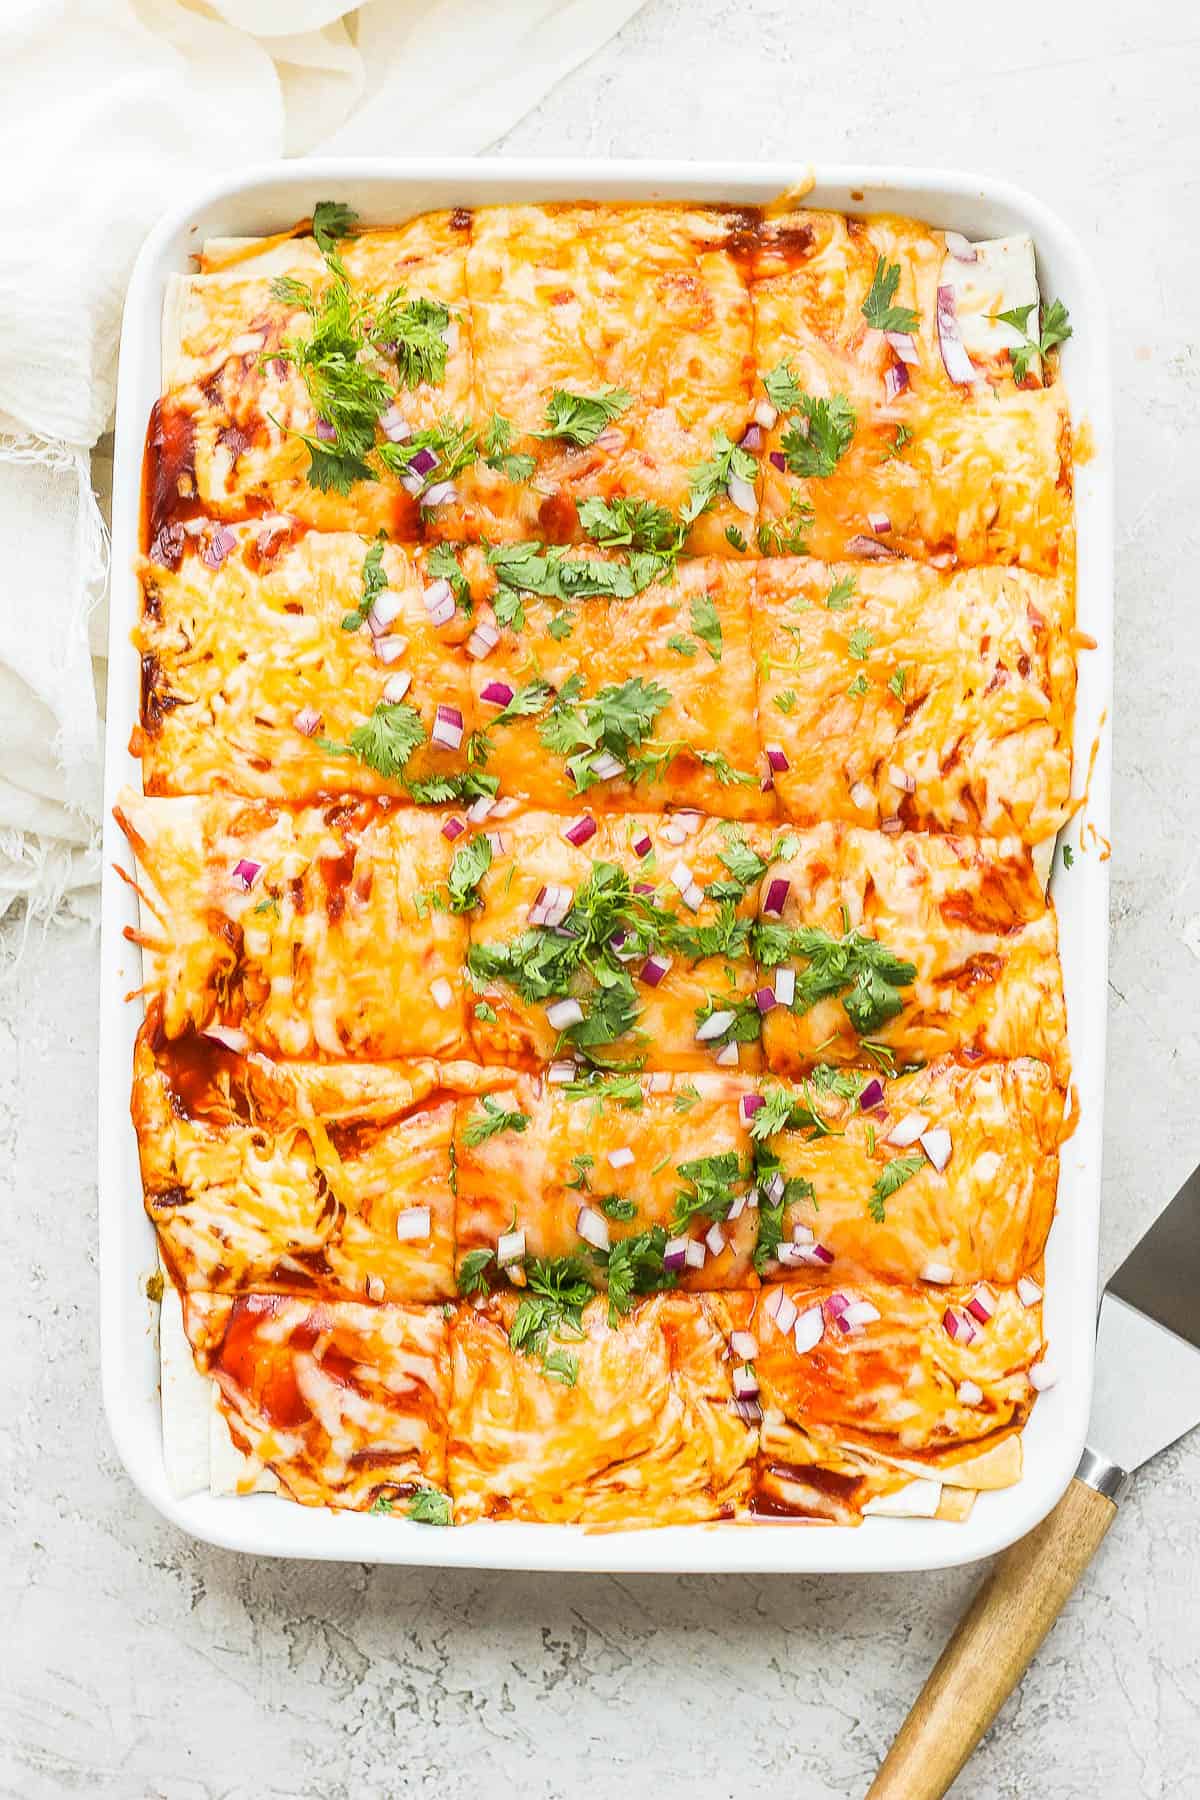 The baked chicken enchilada casserole with fresh cilantro and red onion on top.